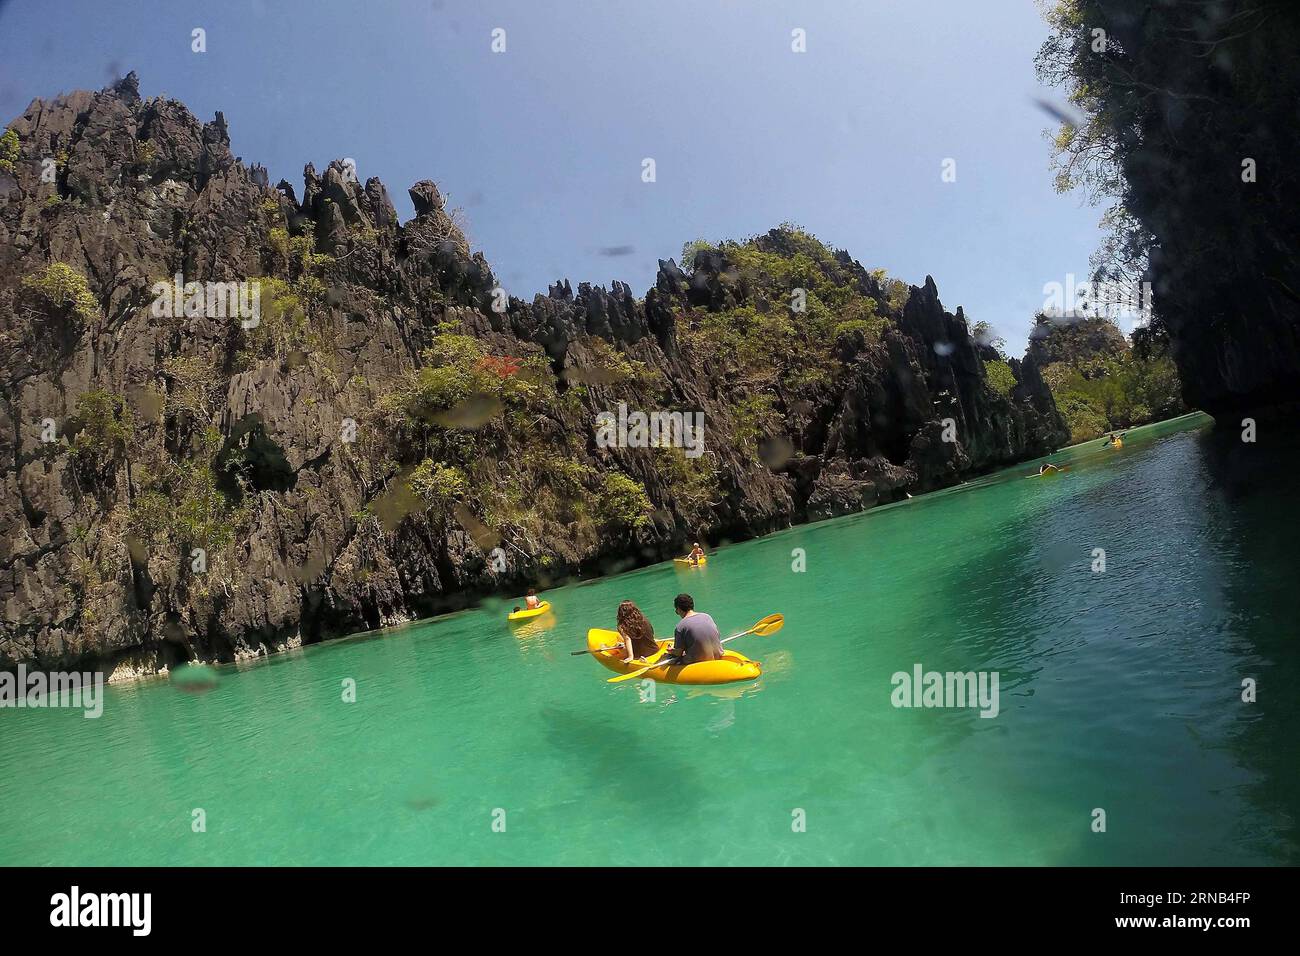 (160218) -- PALAWAN PROVINCE, Feb. 18, 2016 -- Vacationers take kayaks to tour around limestone formations in Palawan Province, the Philippines, Feb. 18, 2016. Tourism revenues are expected to reach 6.5 billion U.S. dollars from the arrivals of six million foreign visitors in 2016 according to the Philippine Department of Tourism. ) PHILIPPINES-PALAWAN PROVINCE-TOURISM RouellexUmali PUBLICATIONxNOTxINxCHN   Palawan Province Feb 18 2016 vacationers Take Kayaks to Tour Around limestone formations in Palawan Province The Philippines Feb 18 2016 Tourism revenues are expected to Reach 6 5 Billion U Stock Photo